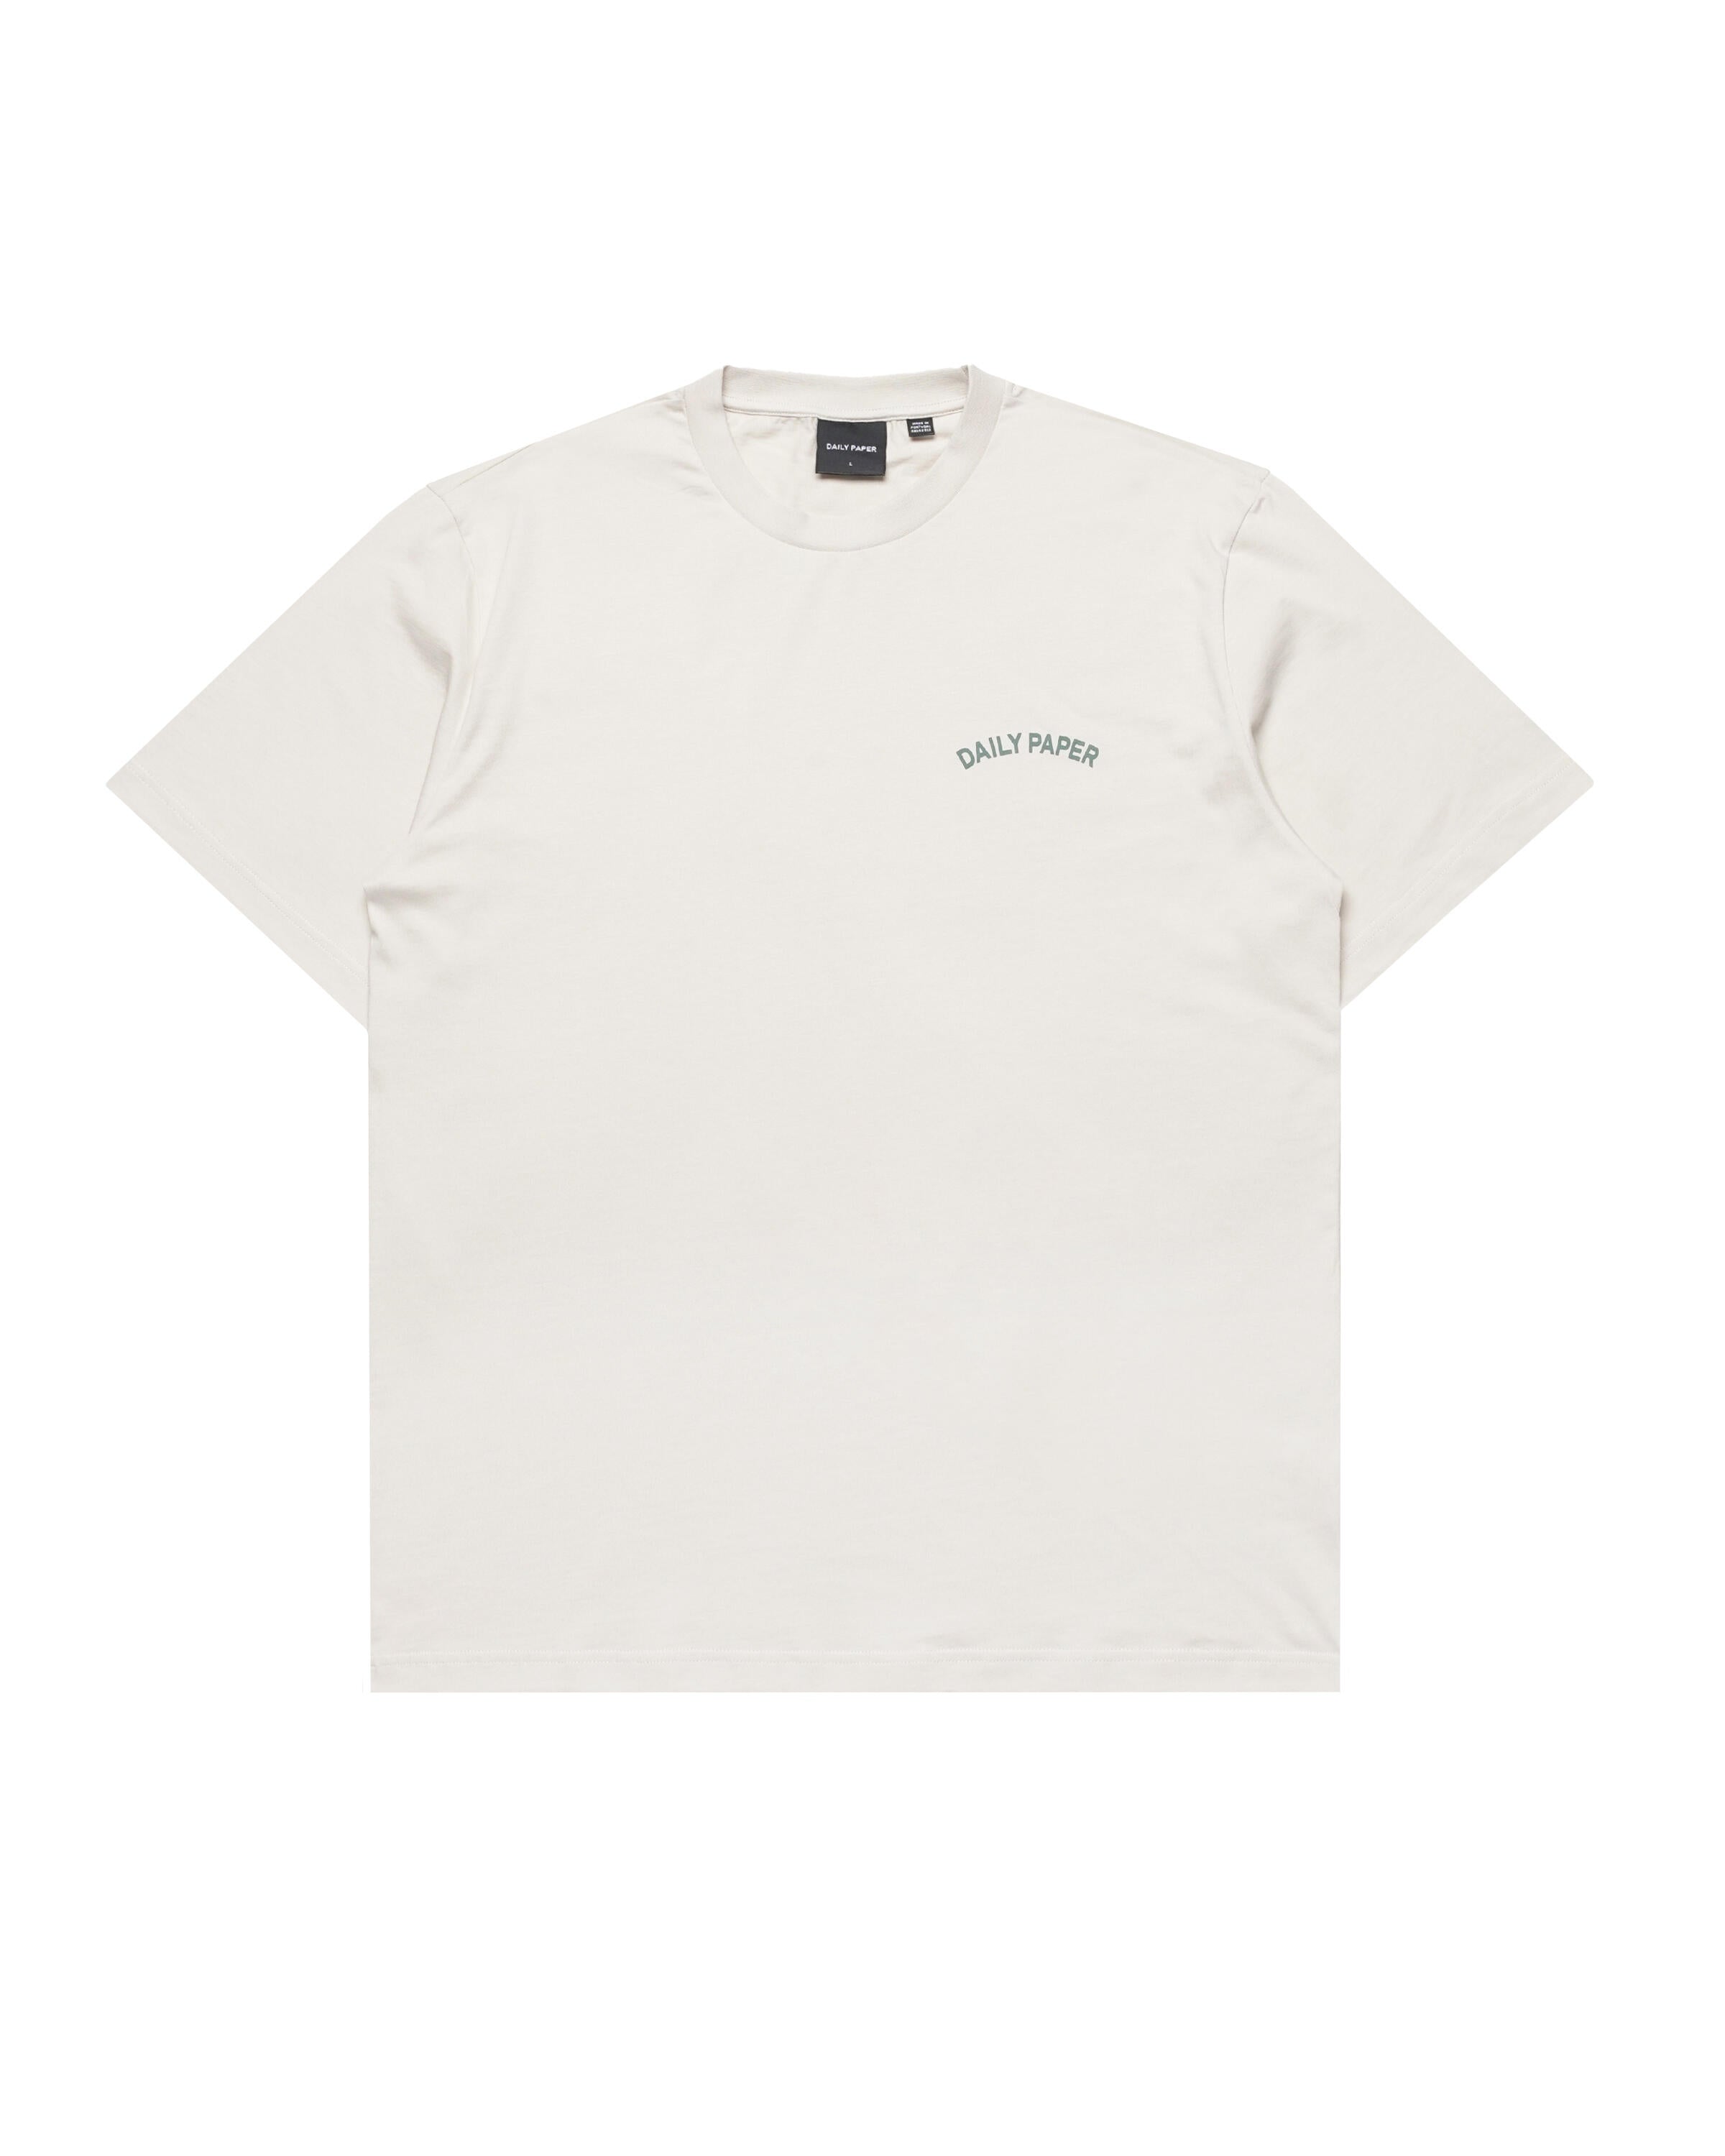 Daily Paper migration T-shirt